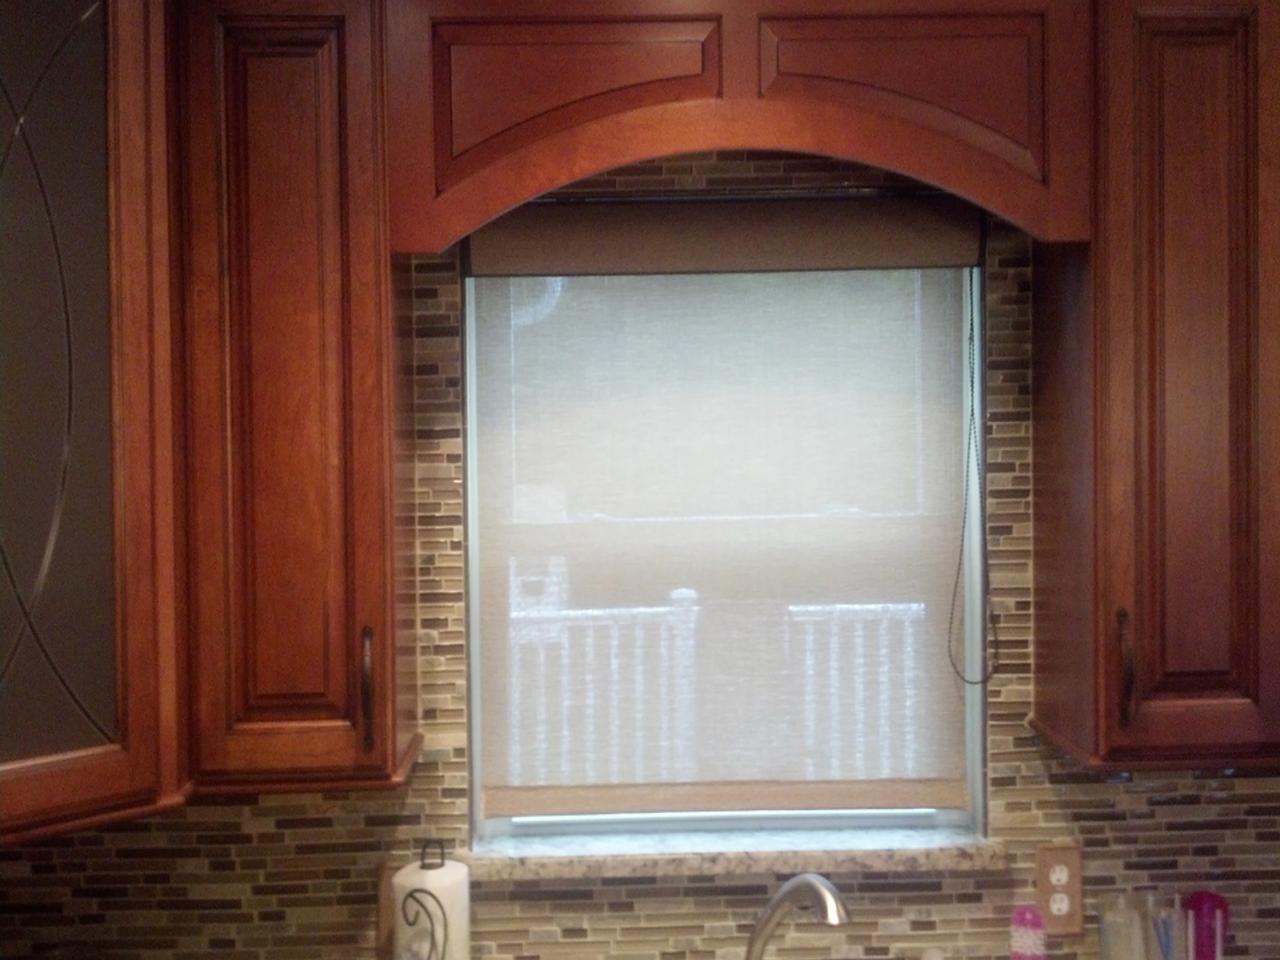 Screen shades over a kitchen window